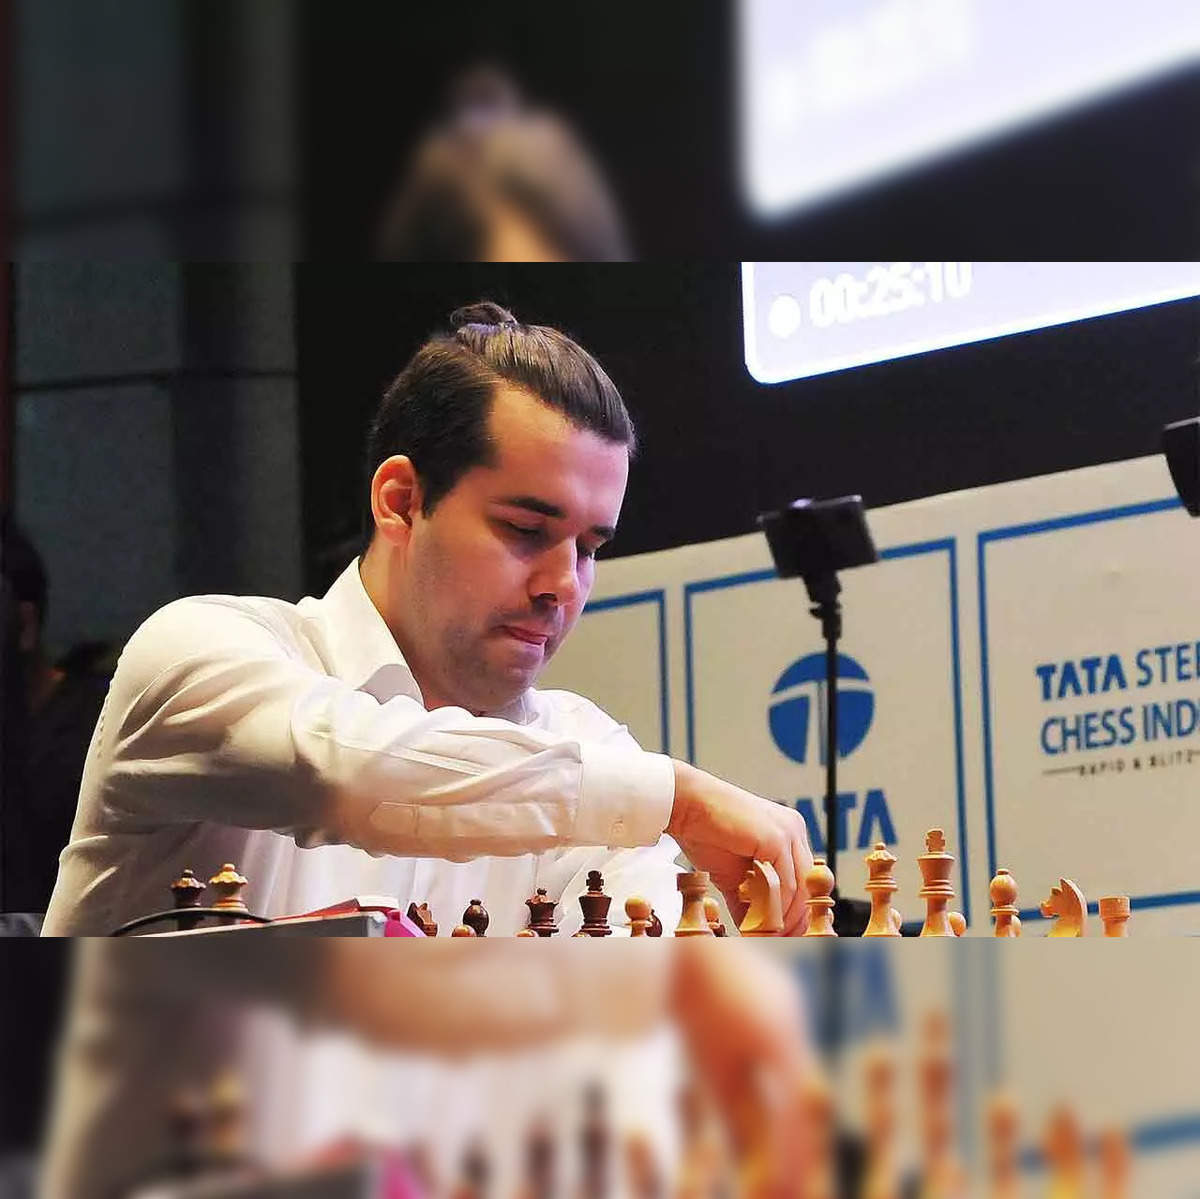 2022 FIDE Candidates  Can The Last World Champion Challenger HOLD